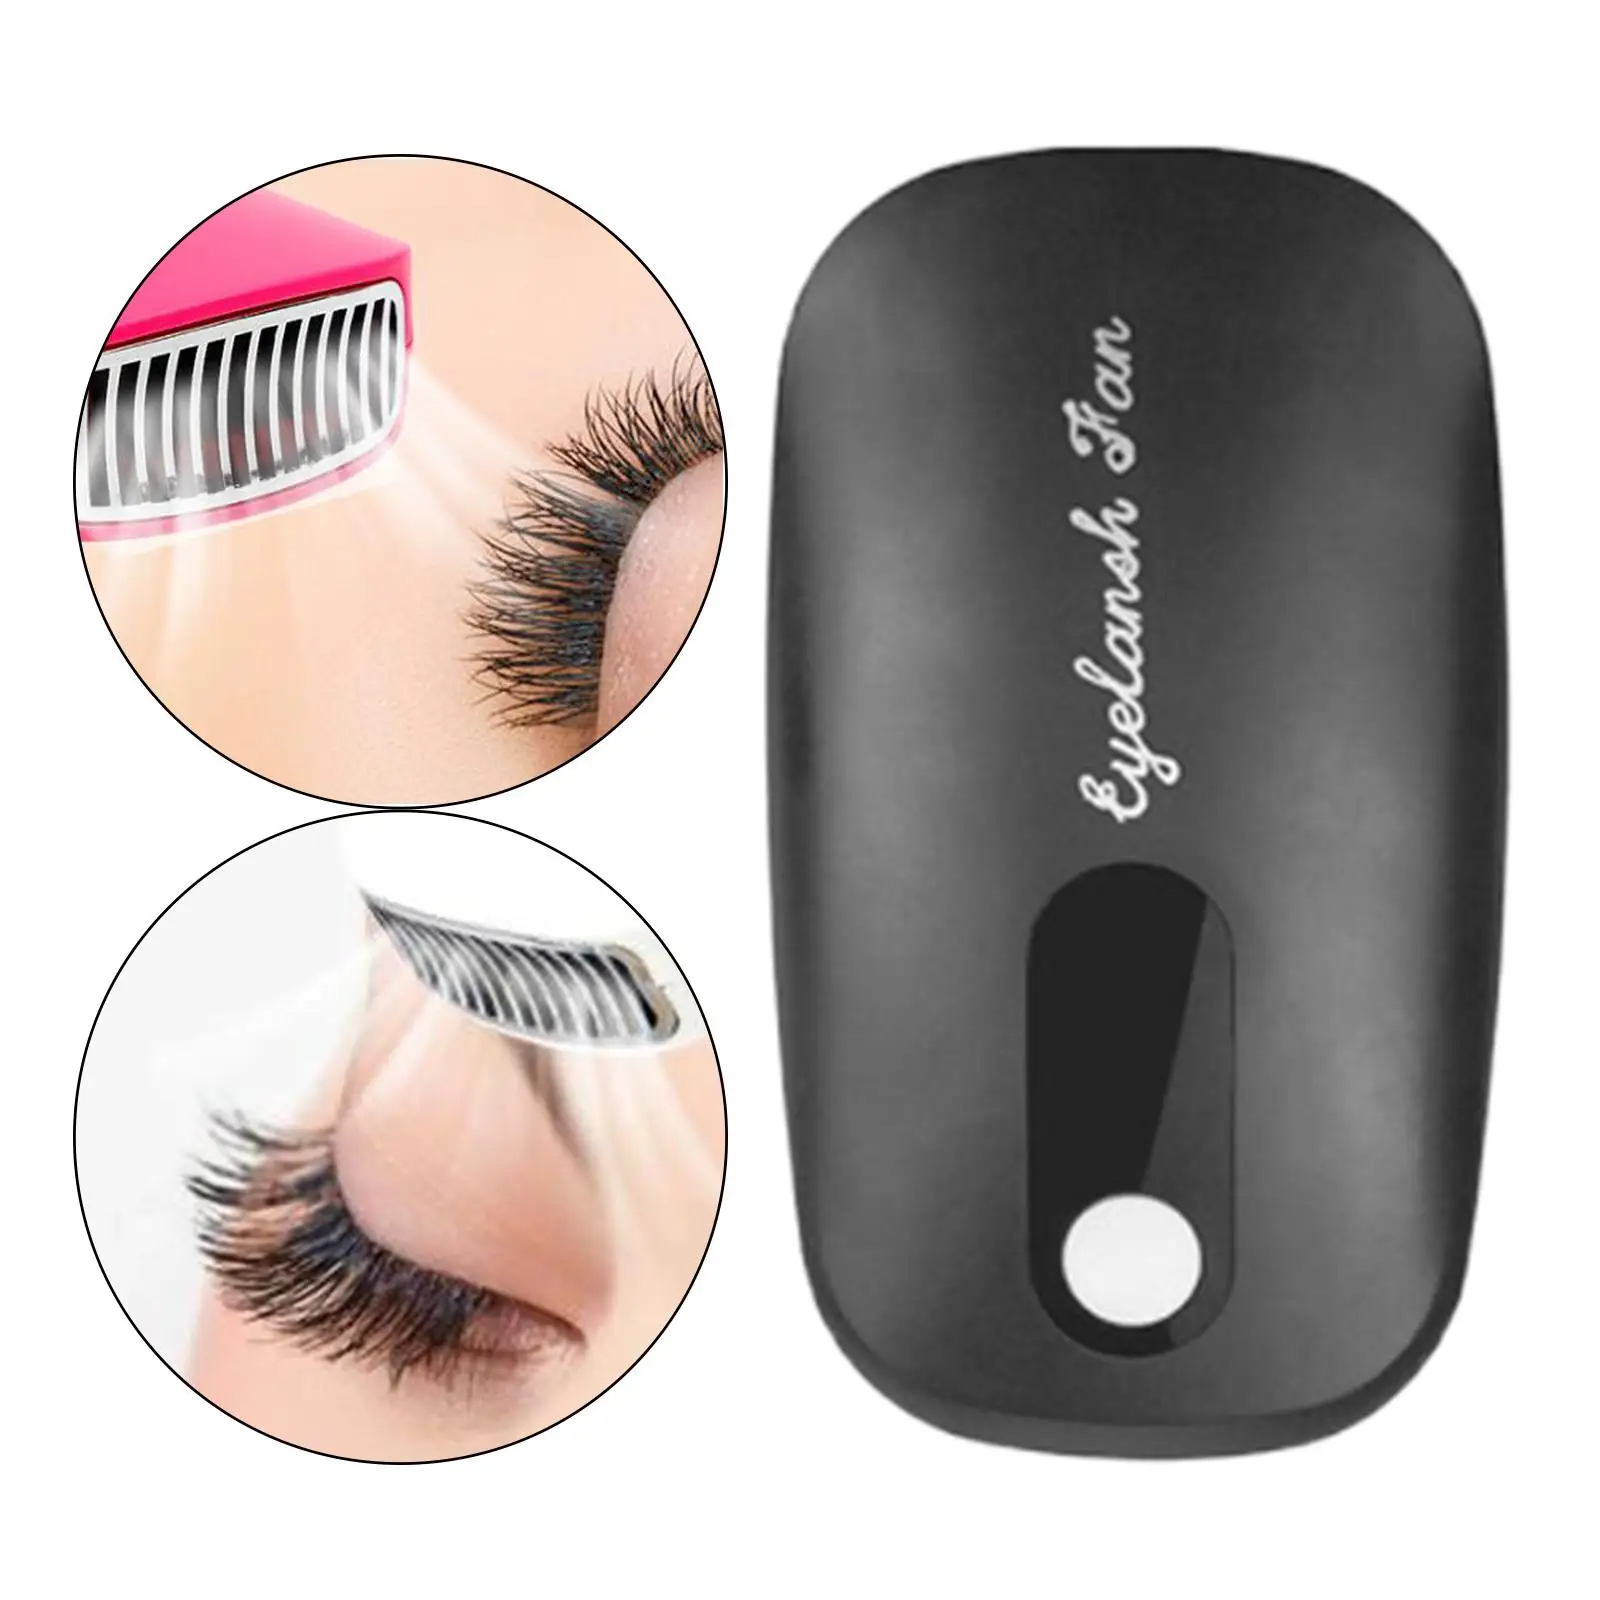 Eyelash Fan Cooling Fans Mini USB Air Conditioning Blower for Lash Extensions Girls Rechargeable Lashes Dryer Eyelash Extension